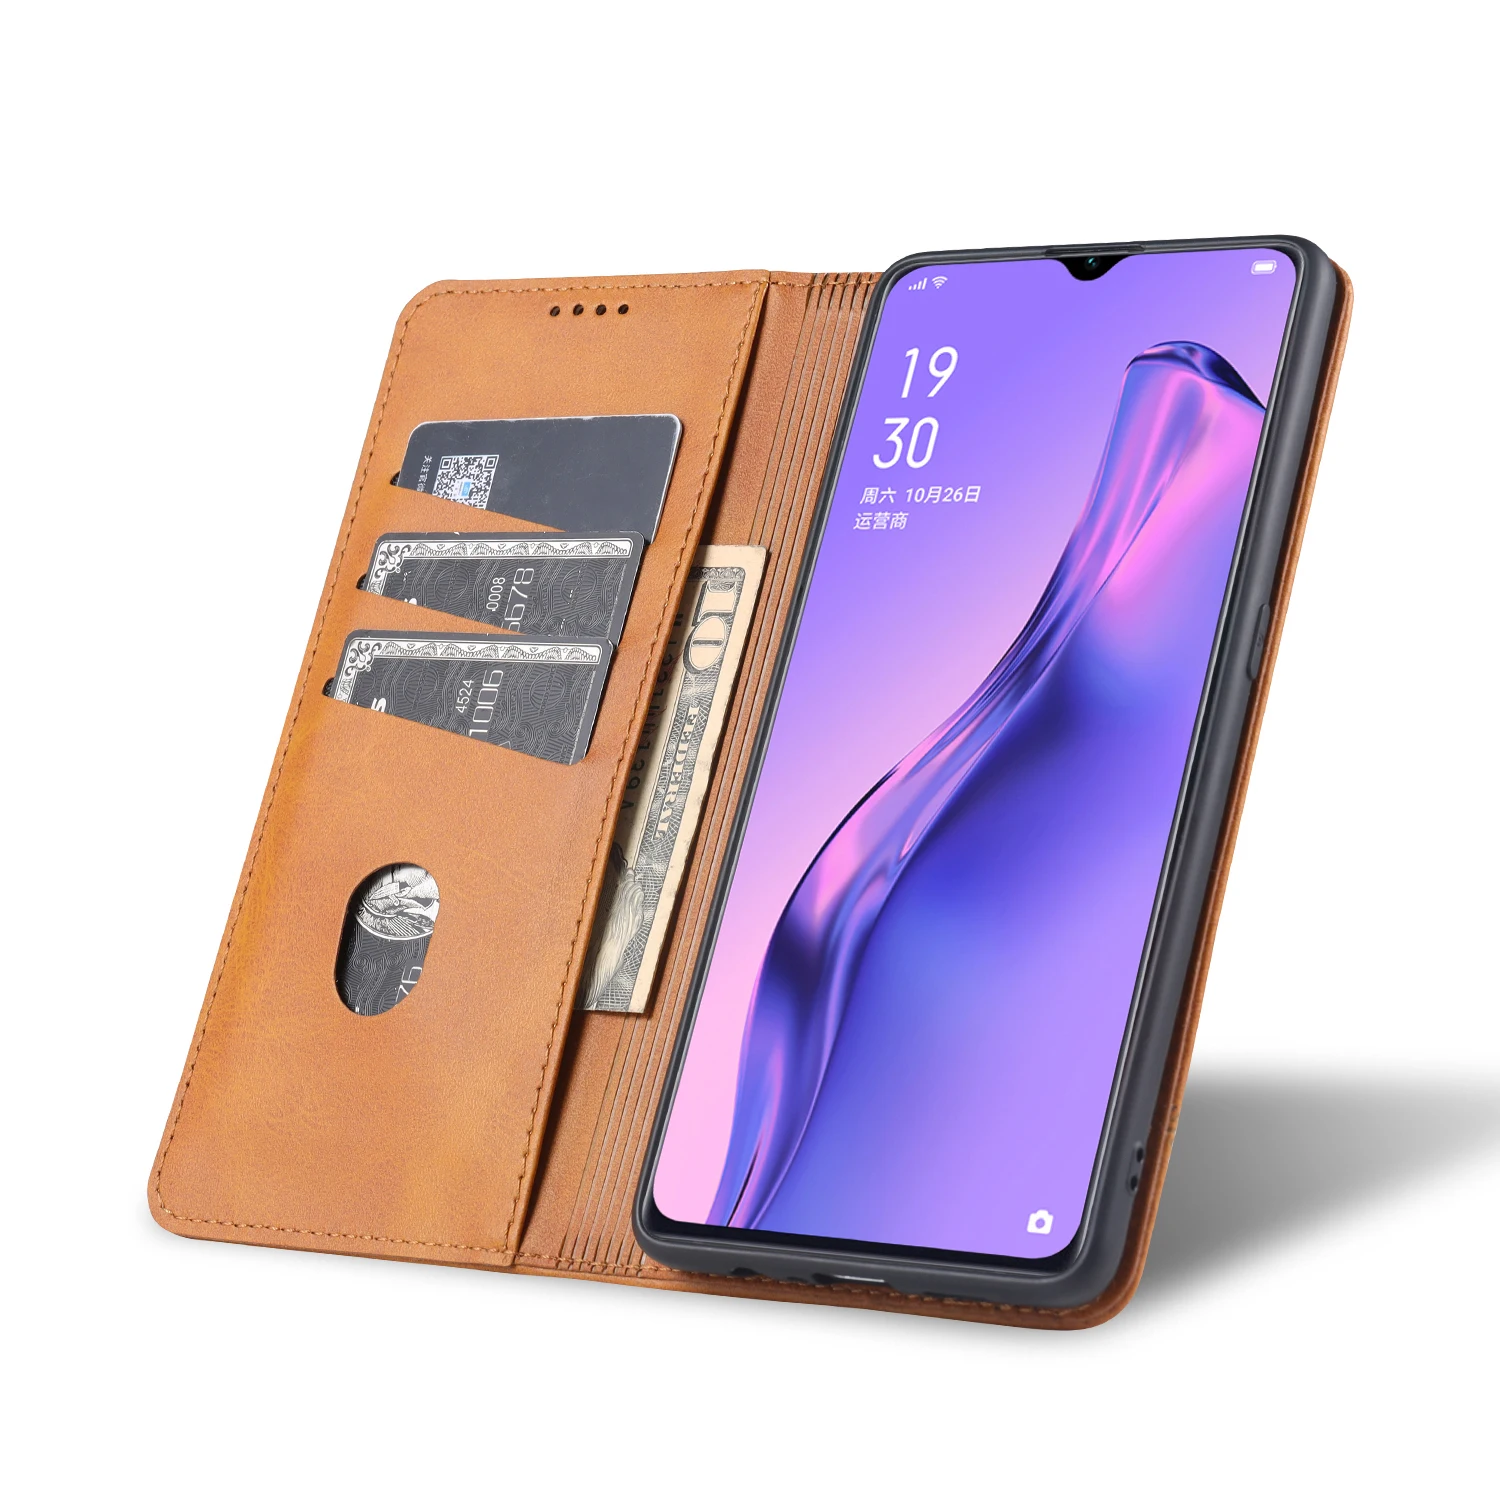 Deluxe Magnetic adsorption leather case for OPPO Reno 3 Global 4G / OPPO A91/ OPPO F15 Flip Cover Protective Case capa fundas